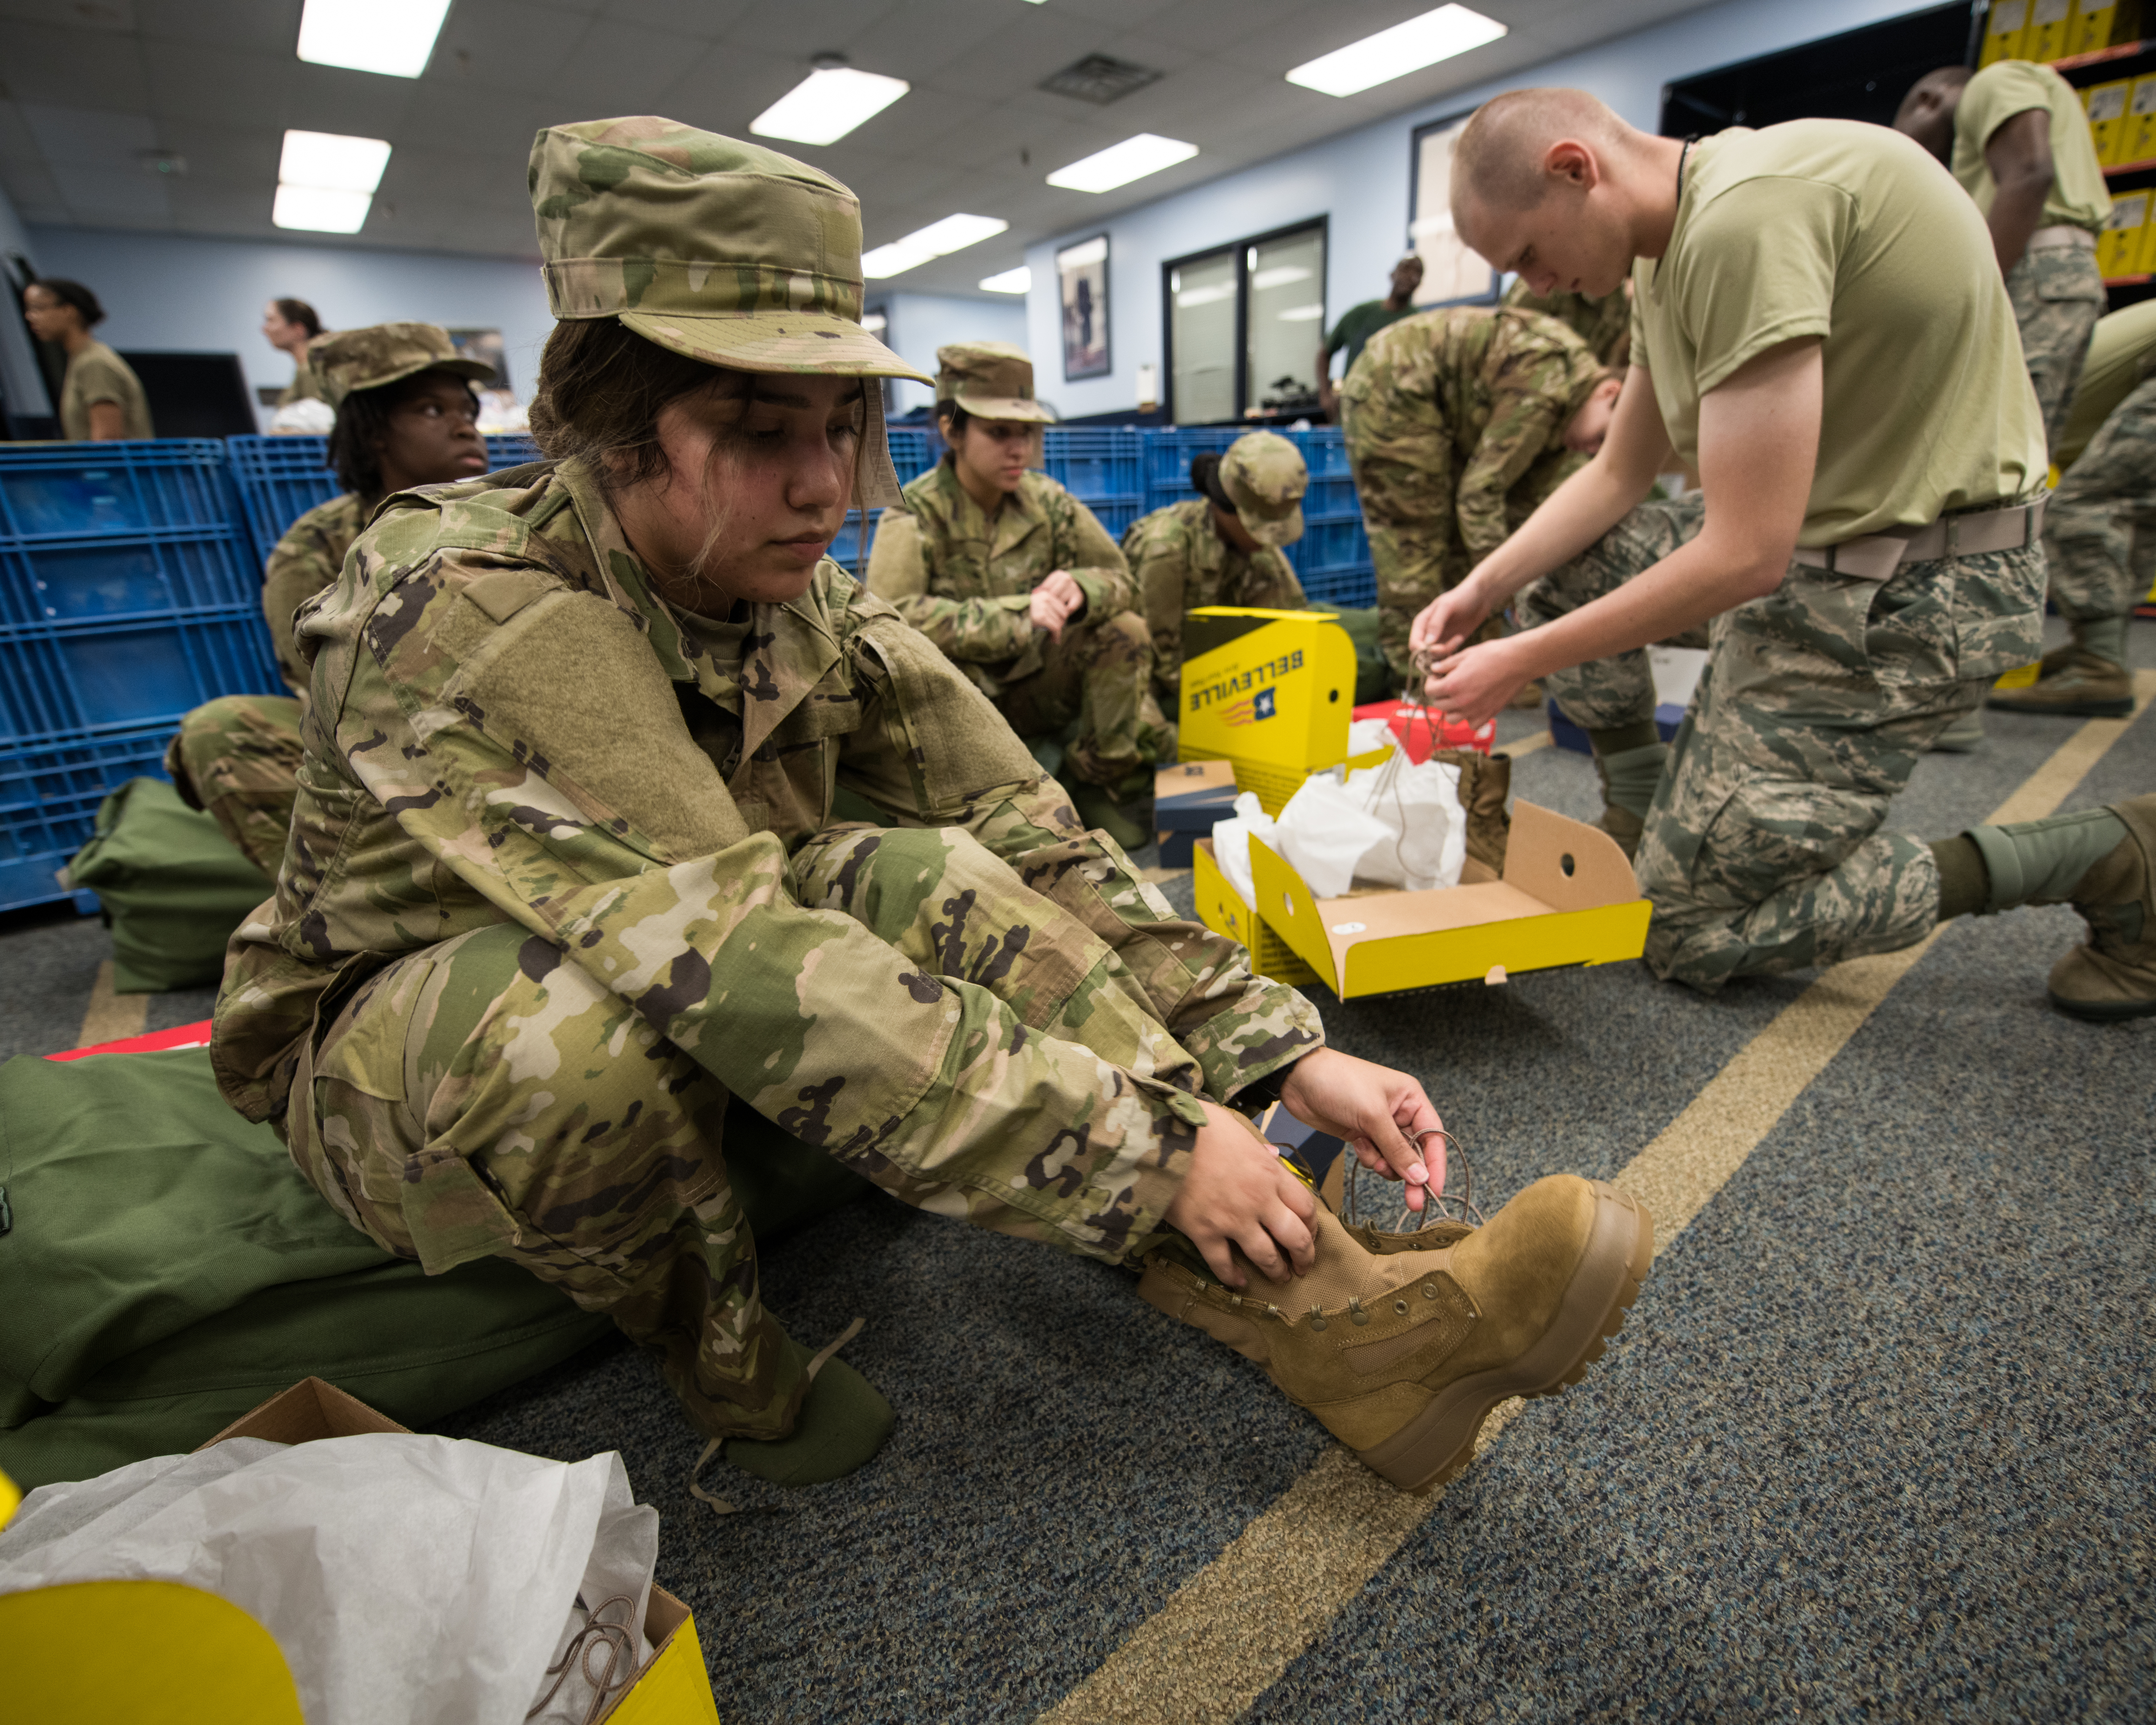 Soldiers putting on boots